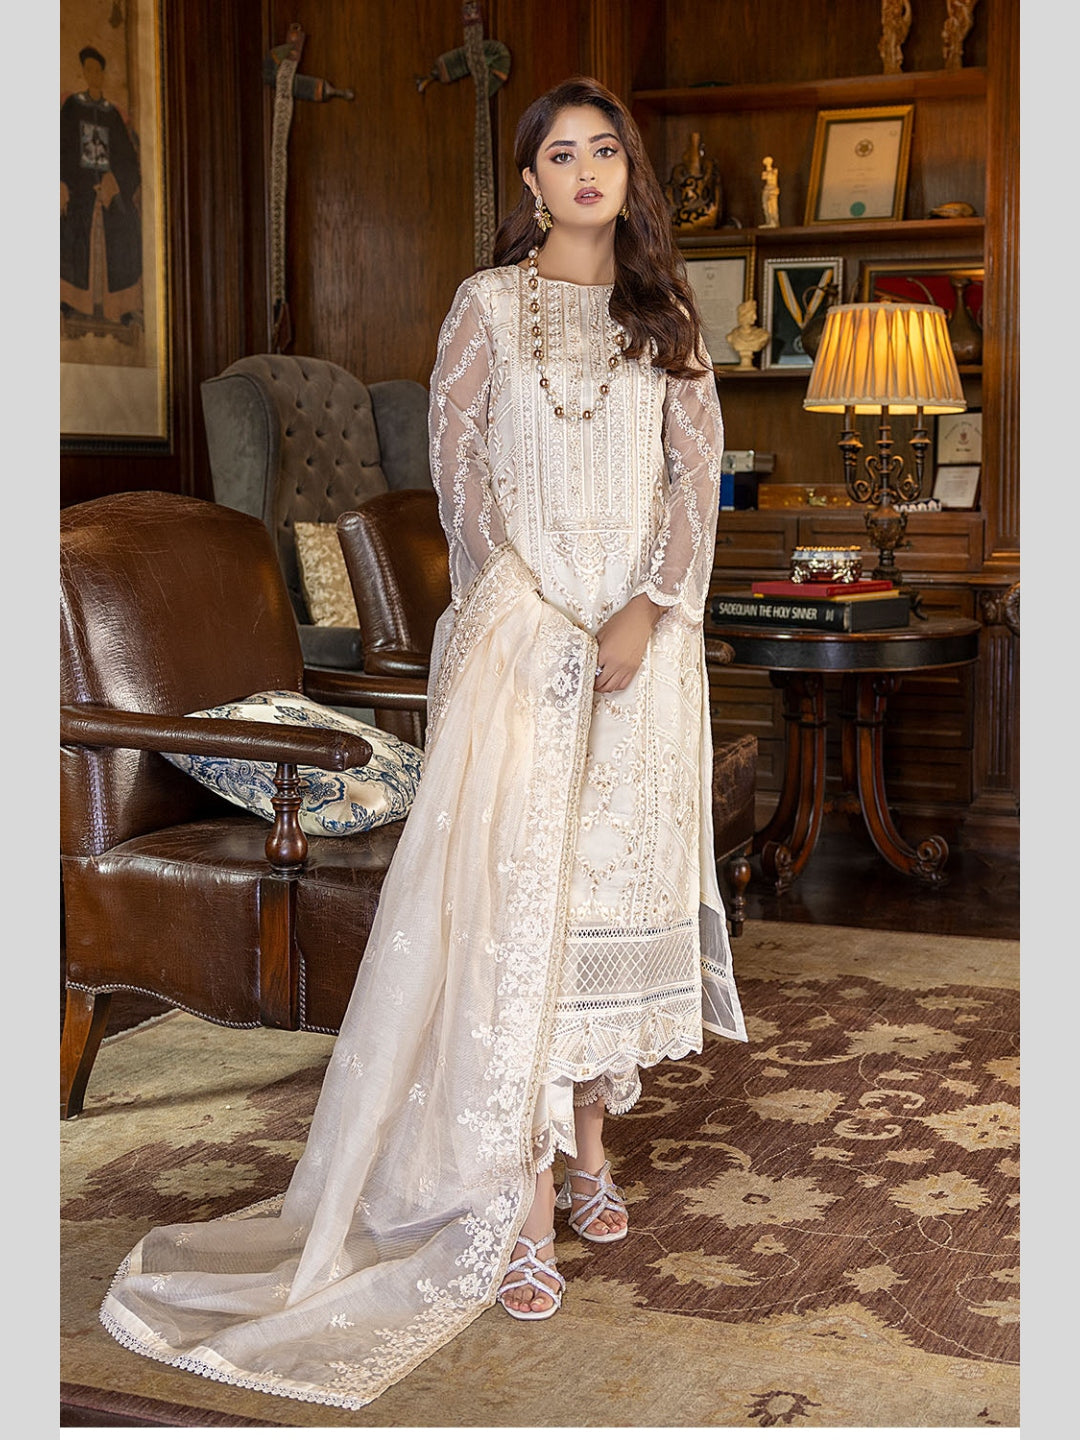 Western Dresses | Indian gowns dresses, Dress indian style, Stylish dresses